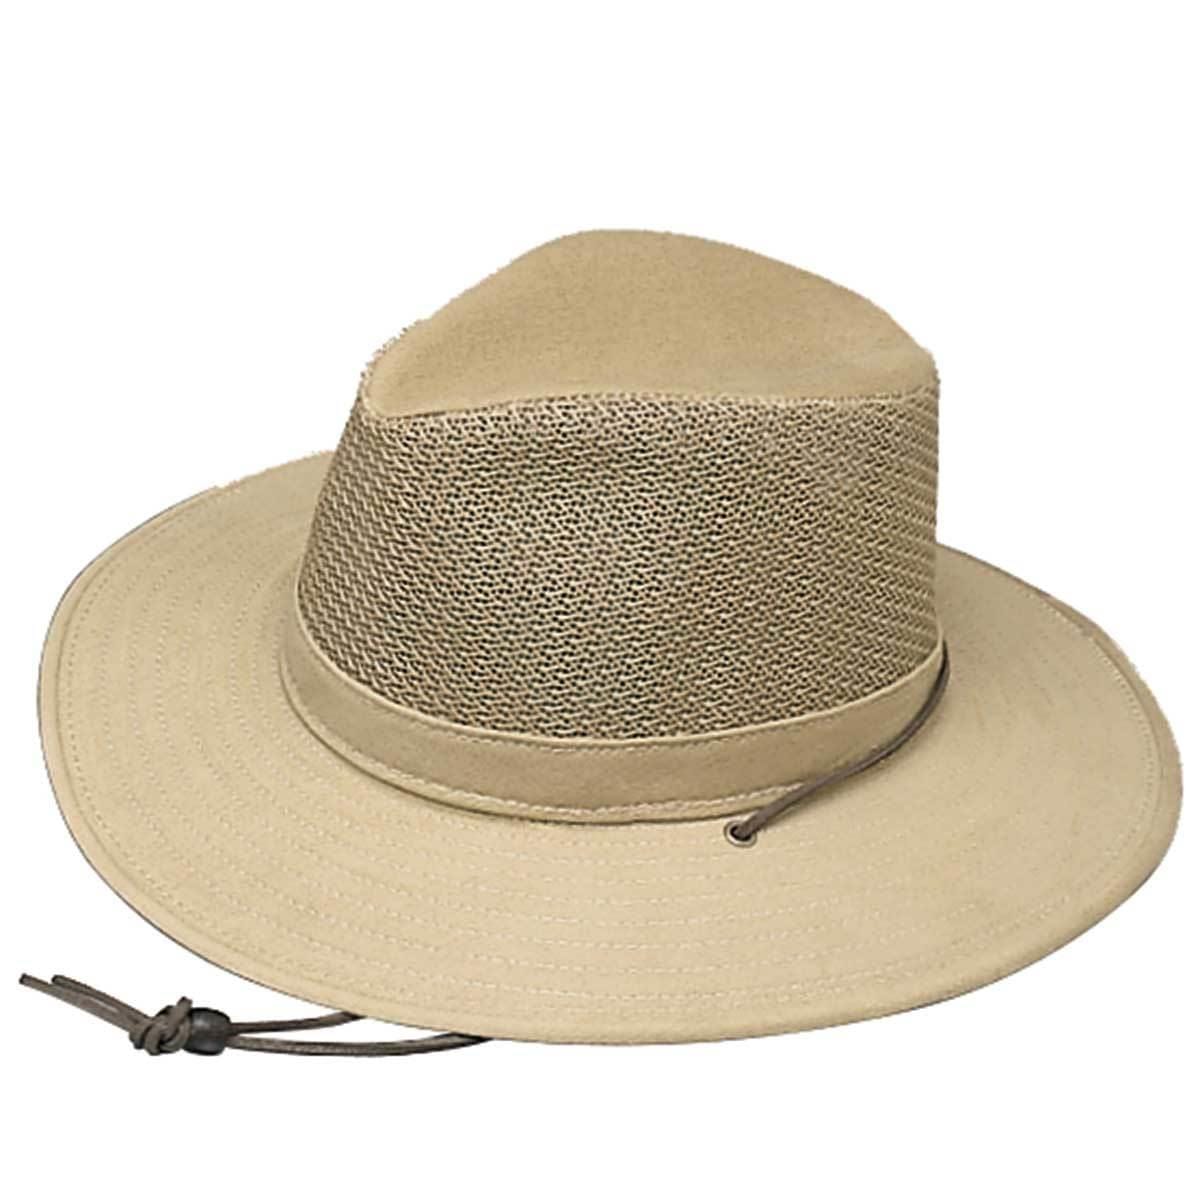 Outback-Style Sun Hat | Gempler's